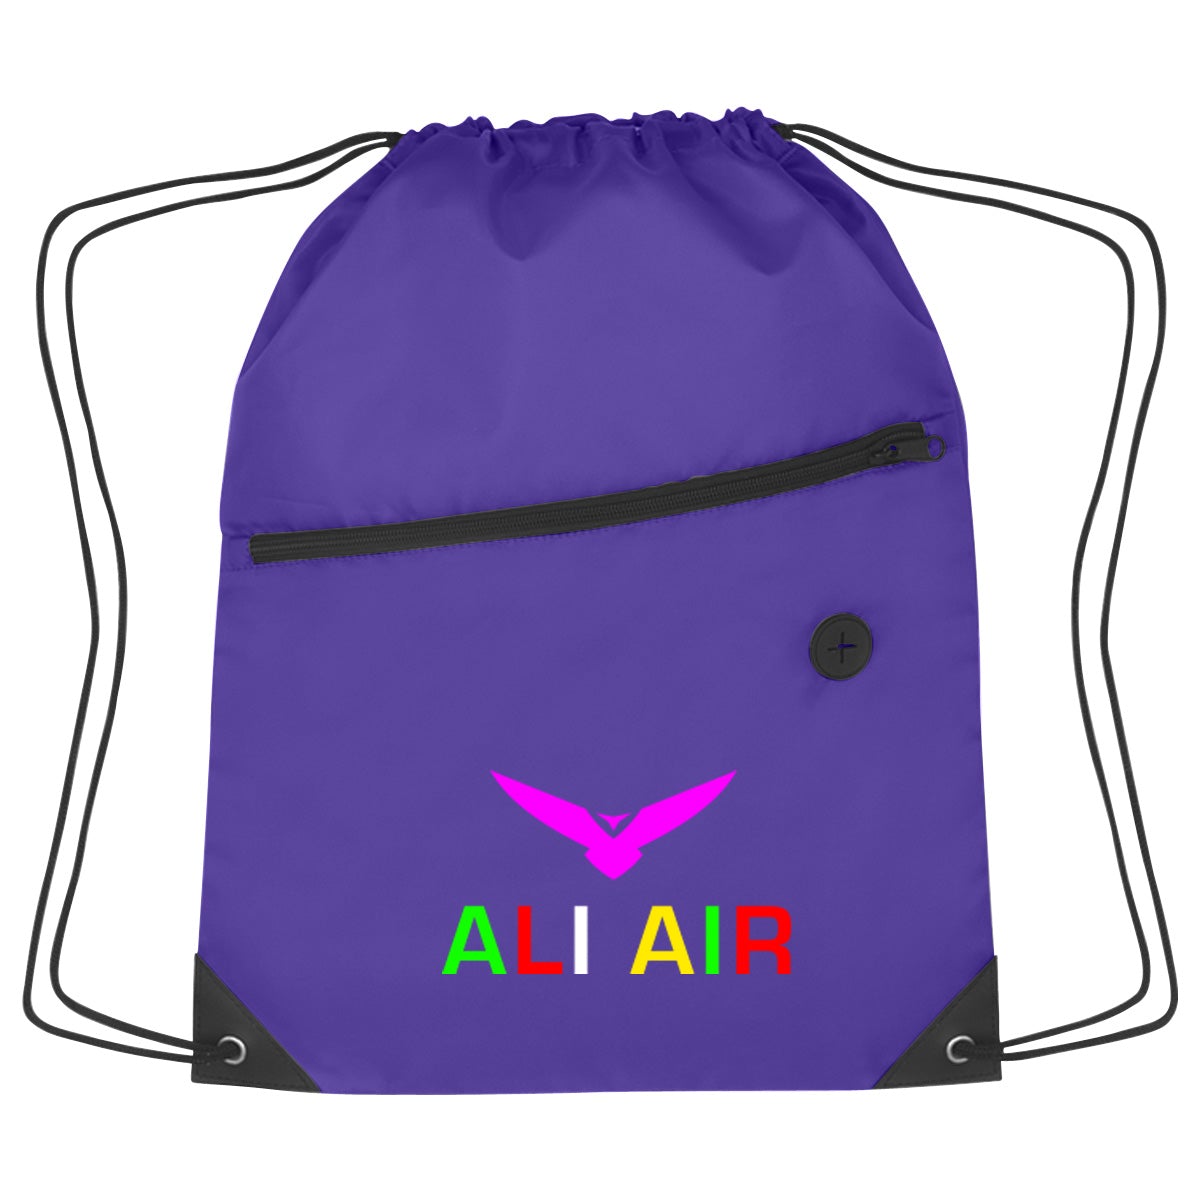 Hit Sports Pack with Front Zipper Drawstring Bags Hit Promo Purple Multi Color 